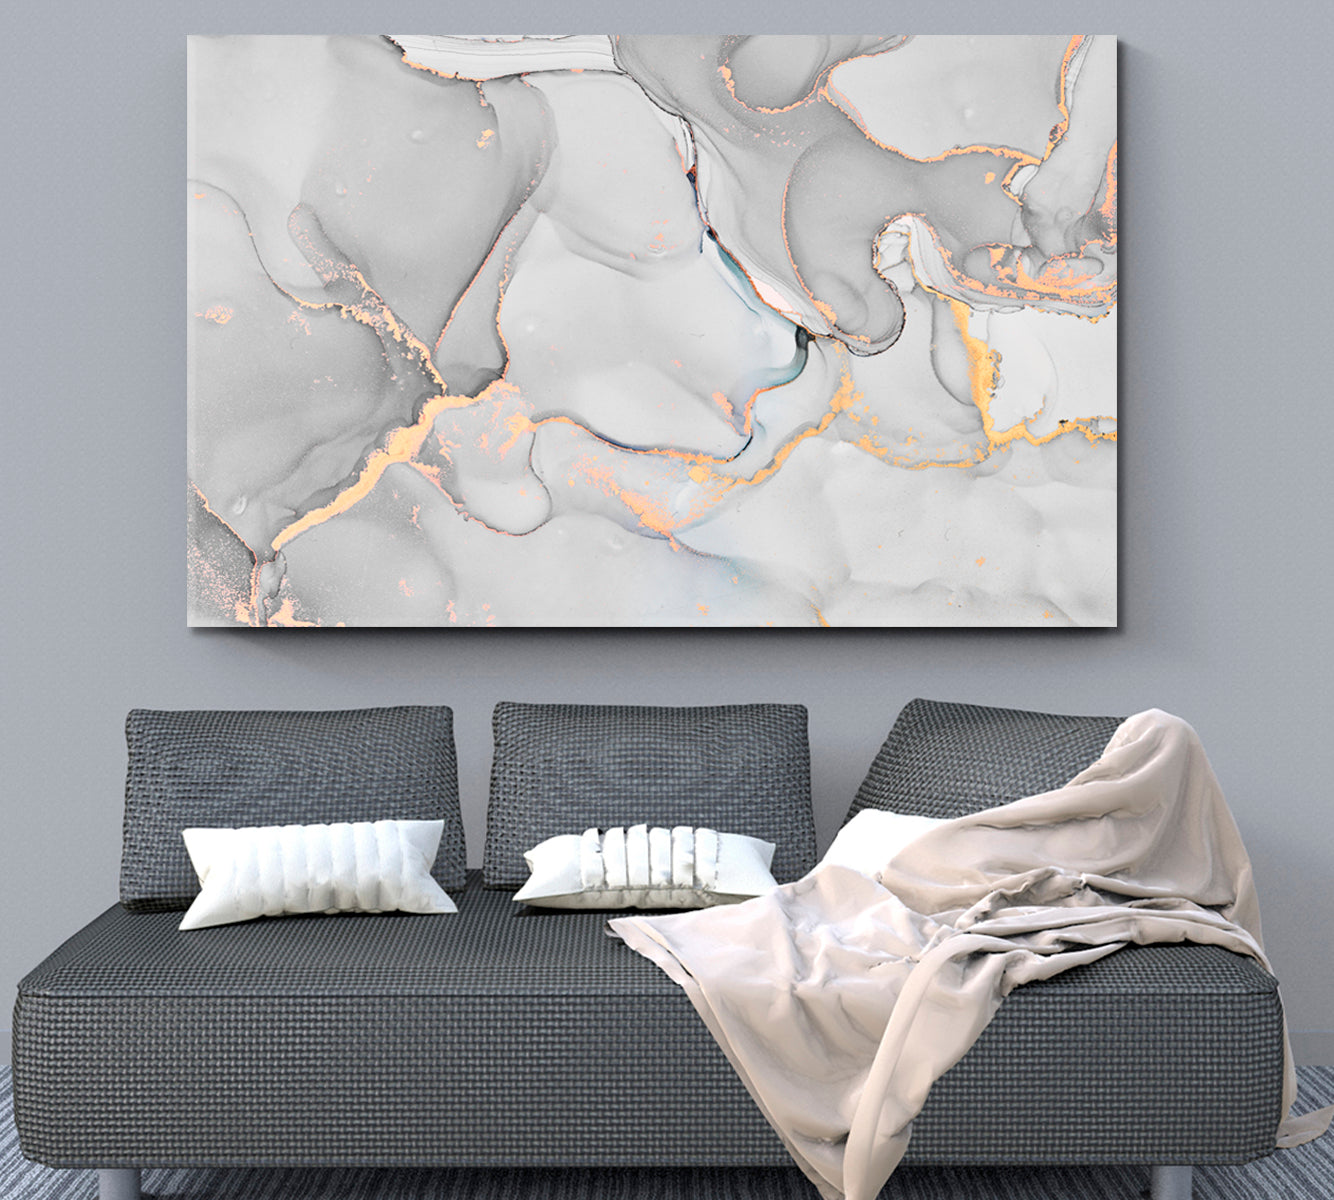 MARBLE Tender Gray White Transparent Waves Abstract Fluid Painting Fluid Art, Oriental Marbling Canvas Print Artesty 1 panel 24" x 16" 